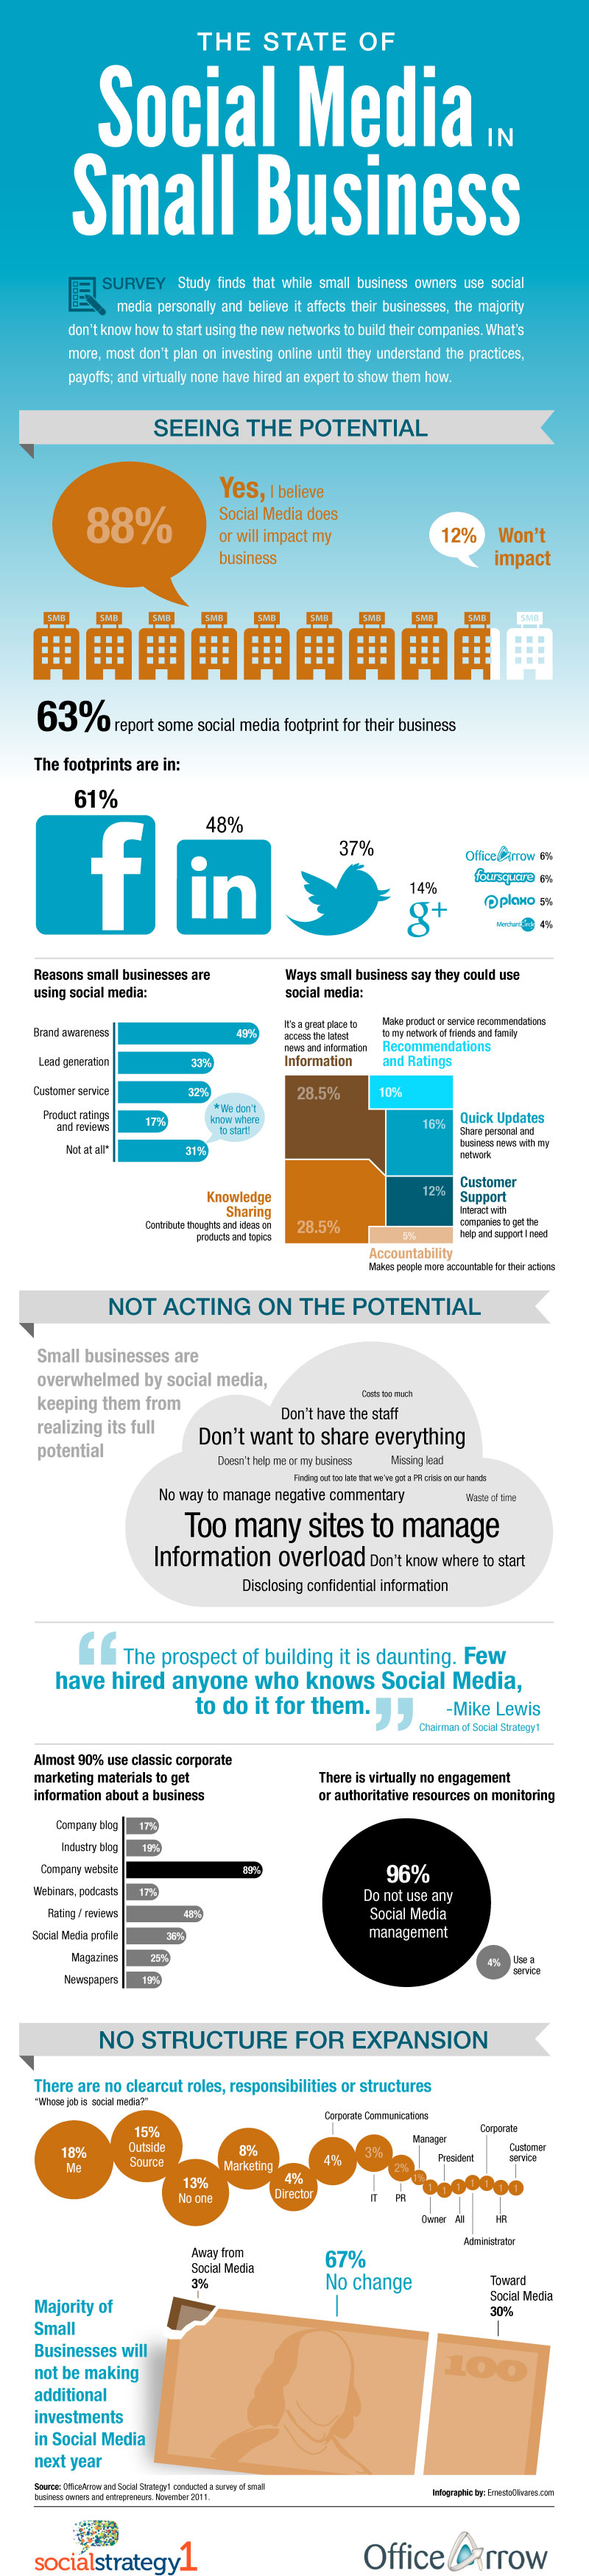 Small Business Social Media Infographic Why you should carefully listen to social media